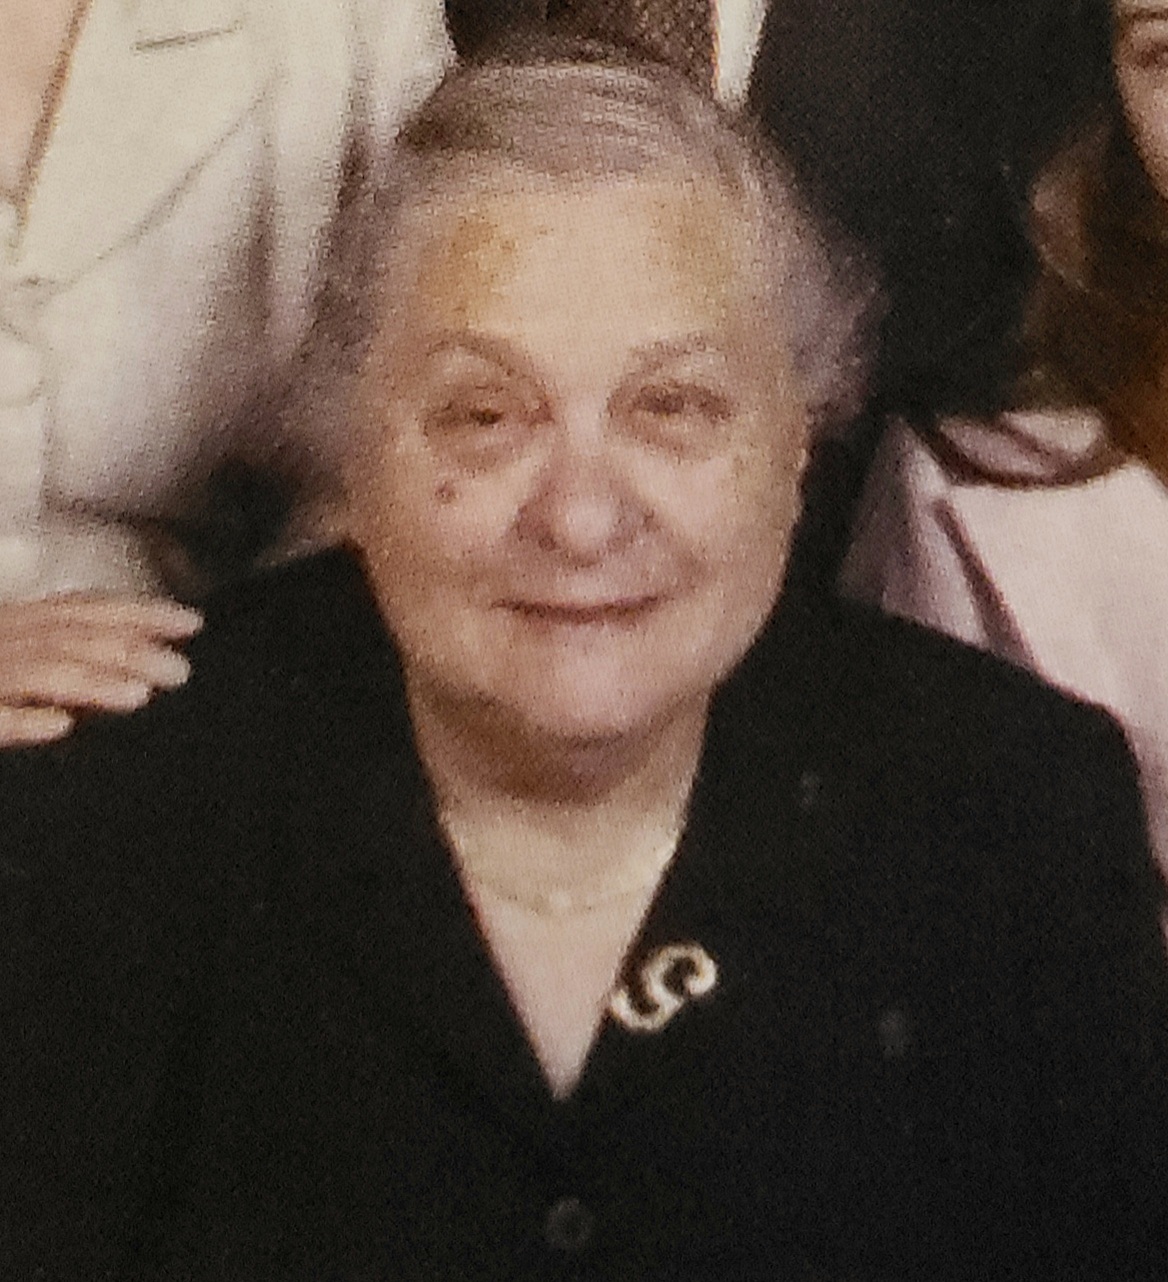 An older woman with grey hair and a plump face with a gentle smile